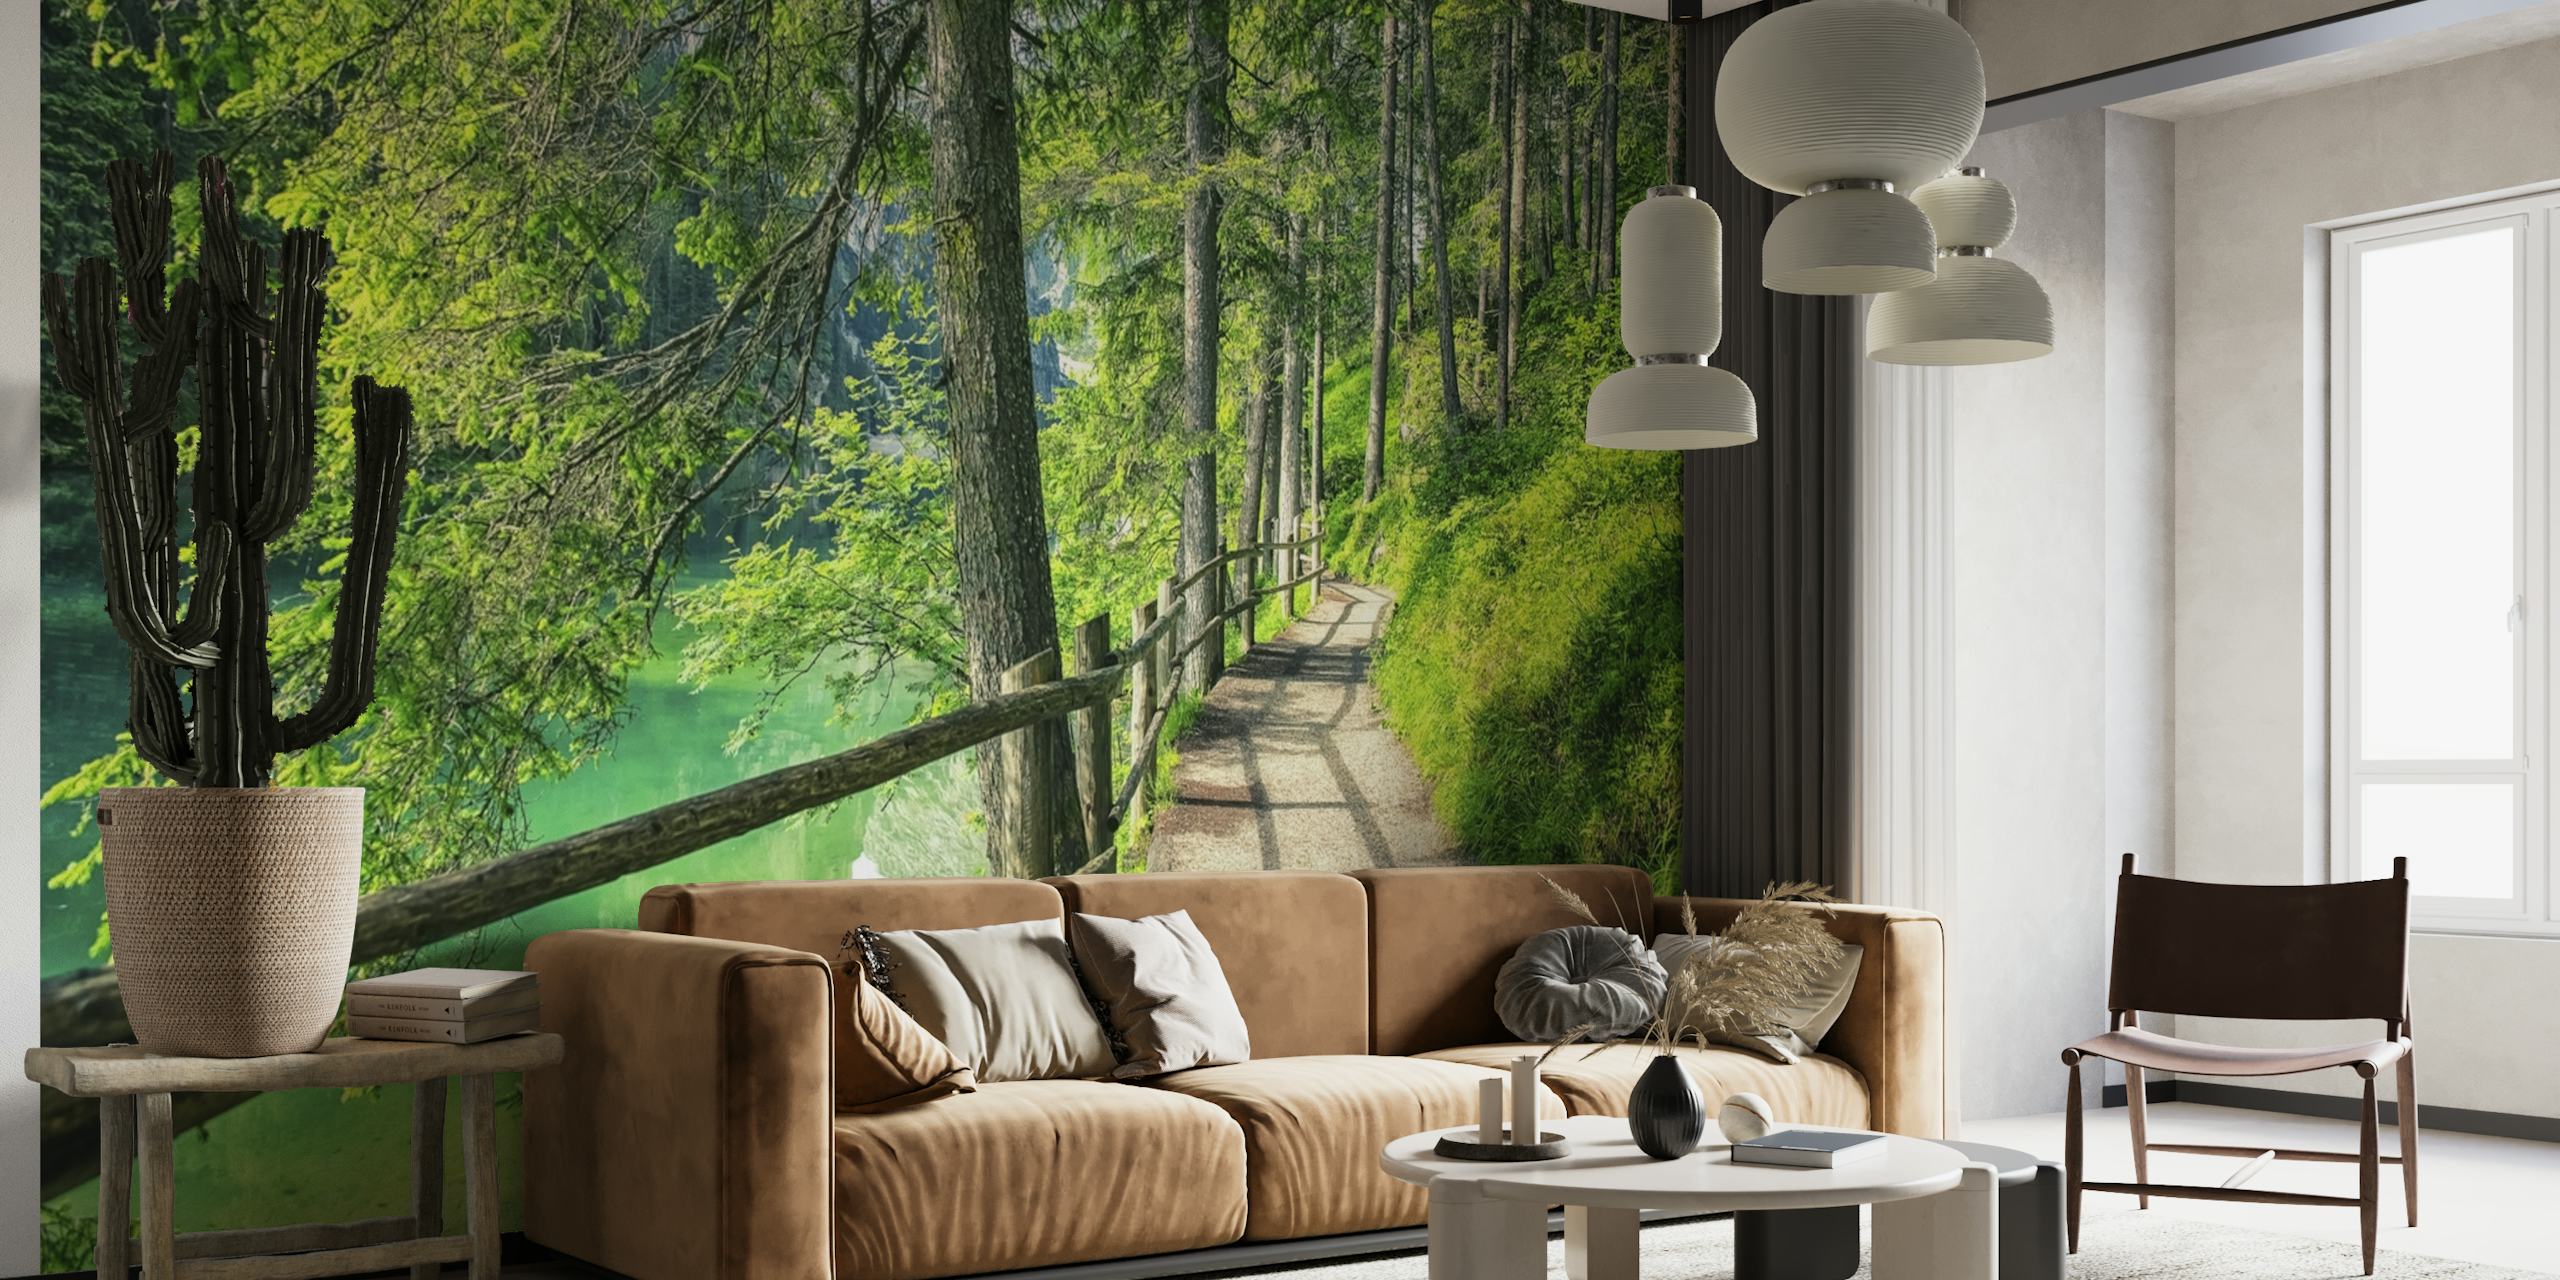 Wall mural of a peaceful woodland path with vibrant green foliage and a wooden fence